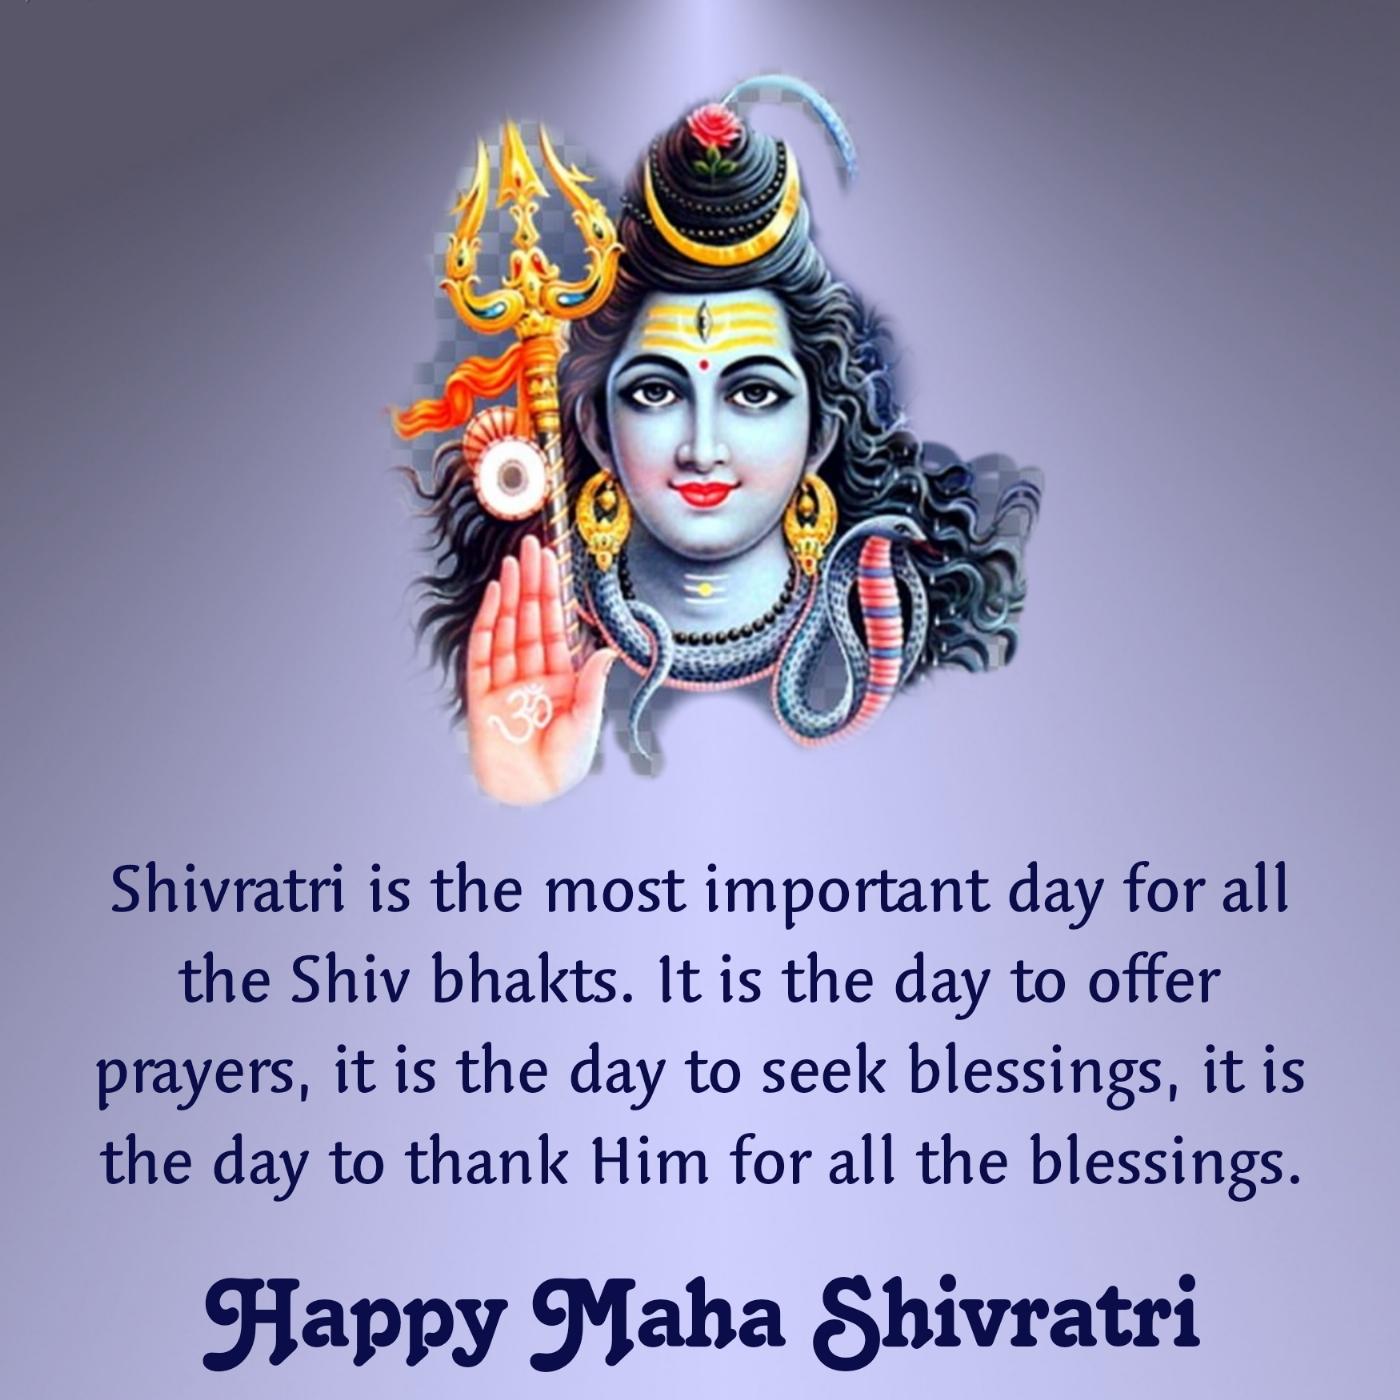 Shivratri is the most important day for all the Shiv bhakts